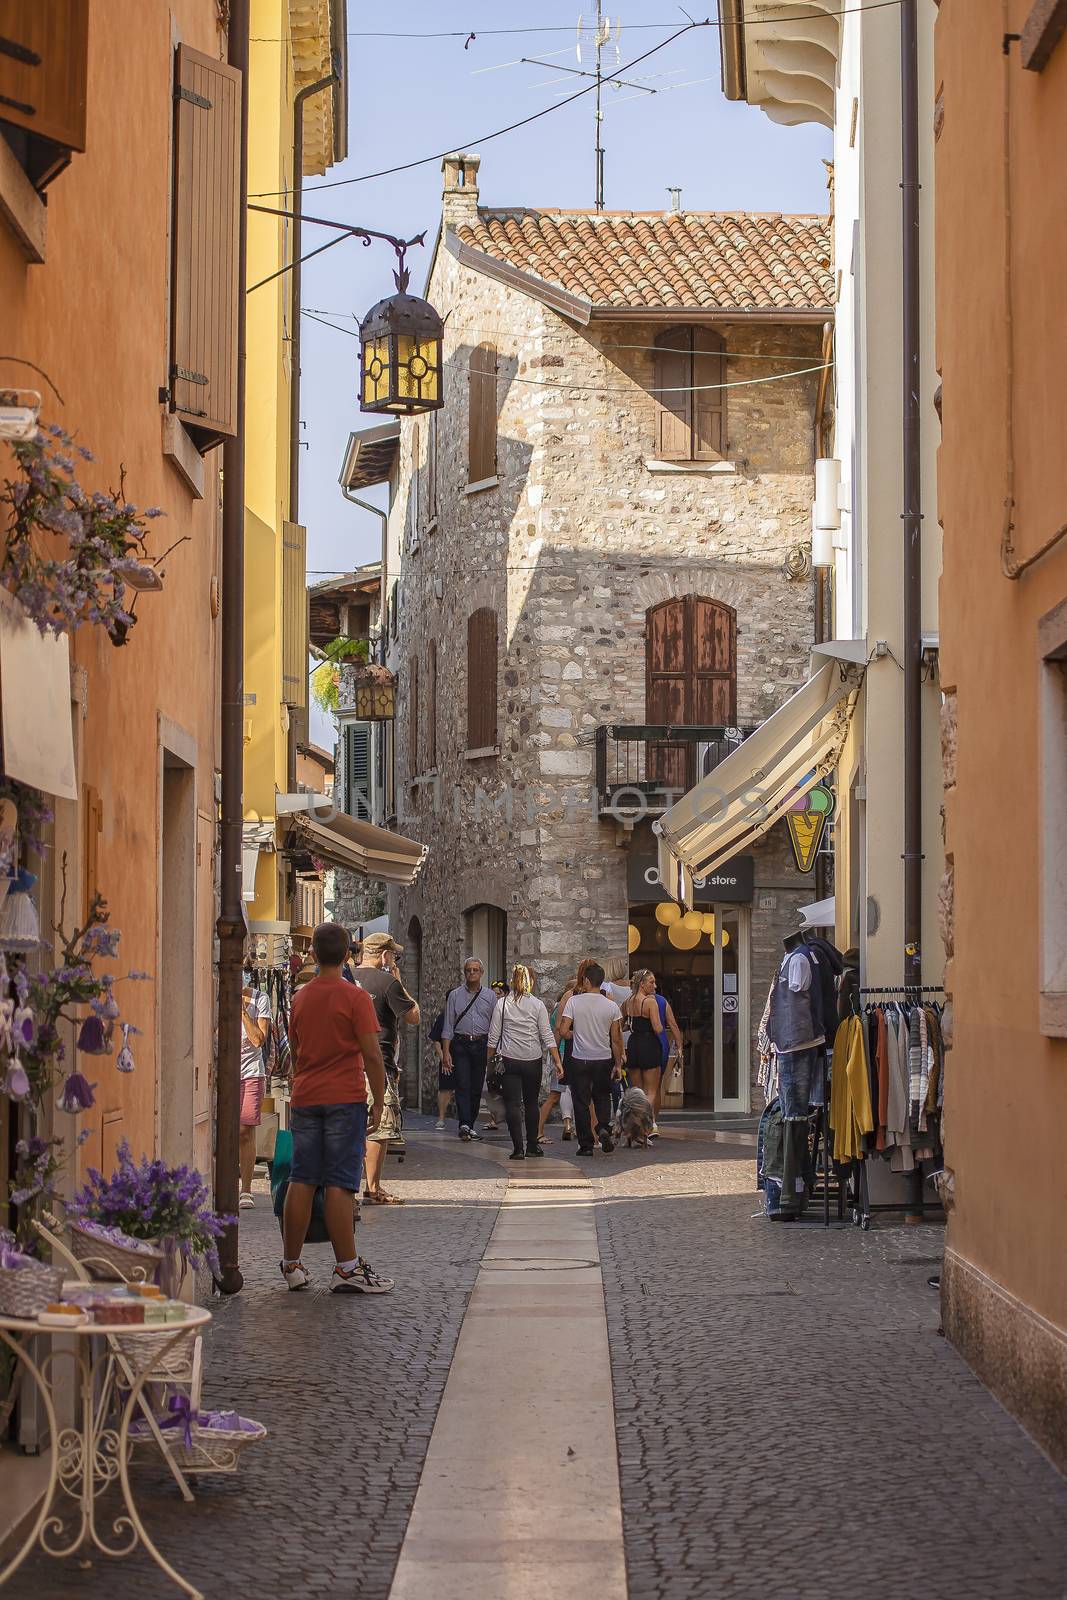 Alley with people and tourists walking in Lazise in Italy by pippocarlot